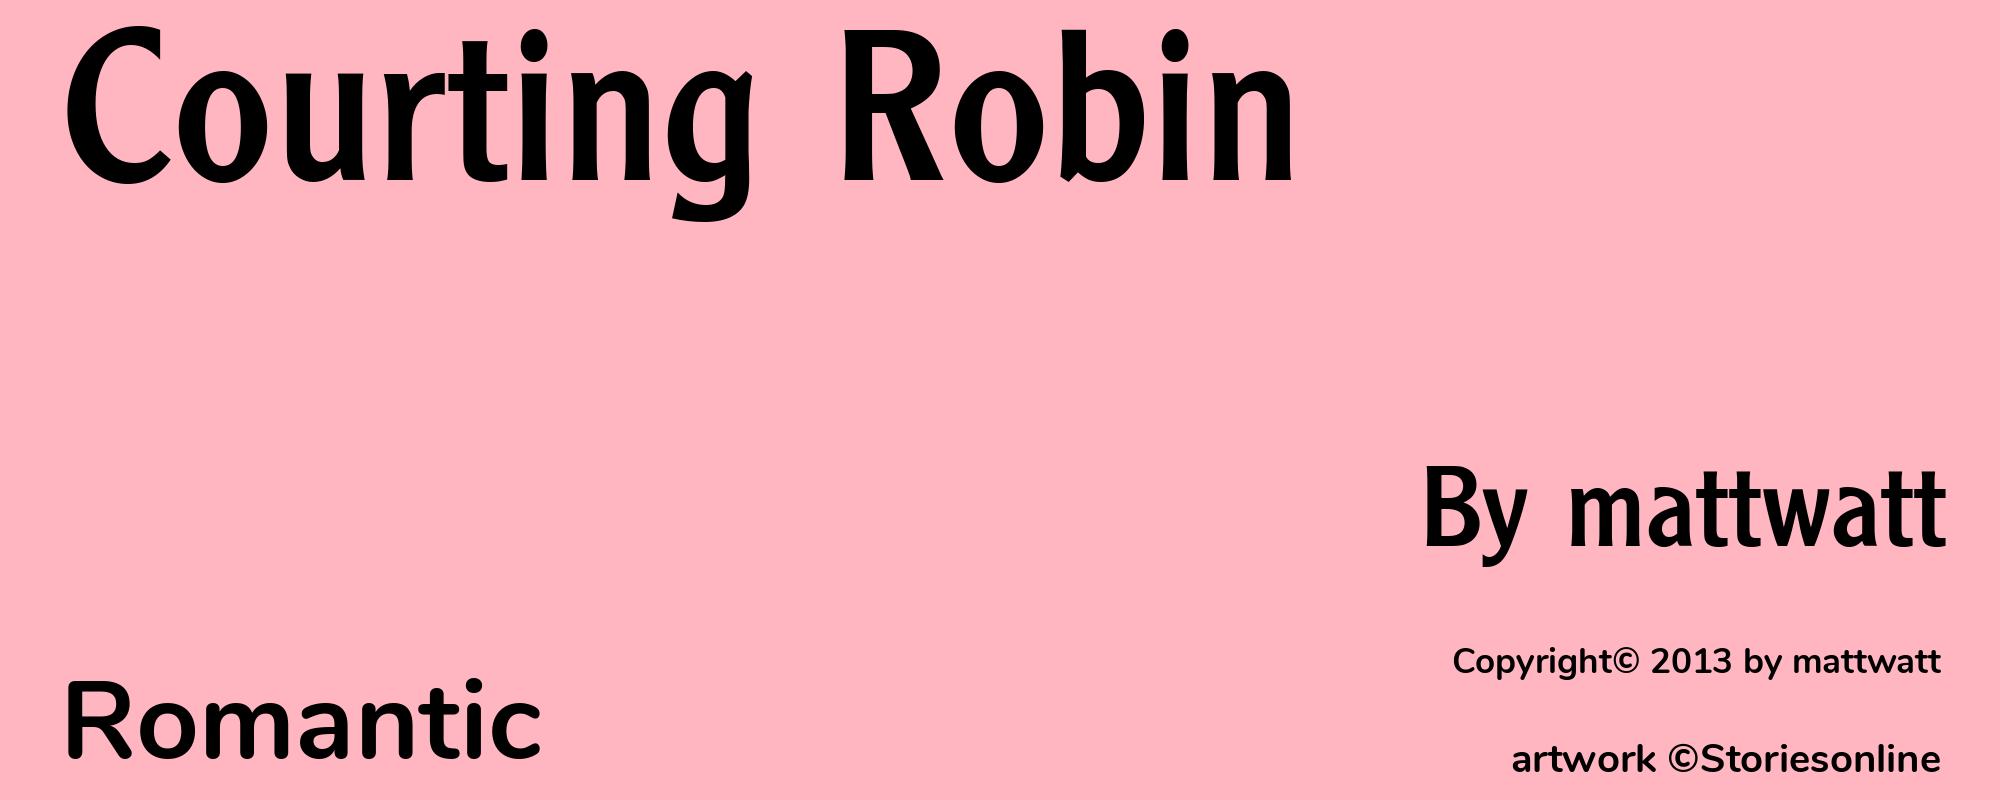 Courting Robin - Cover